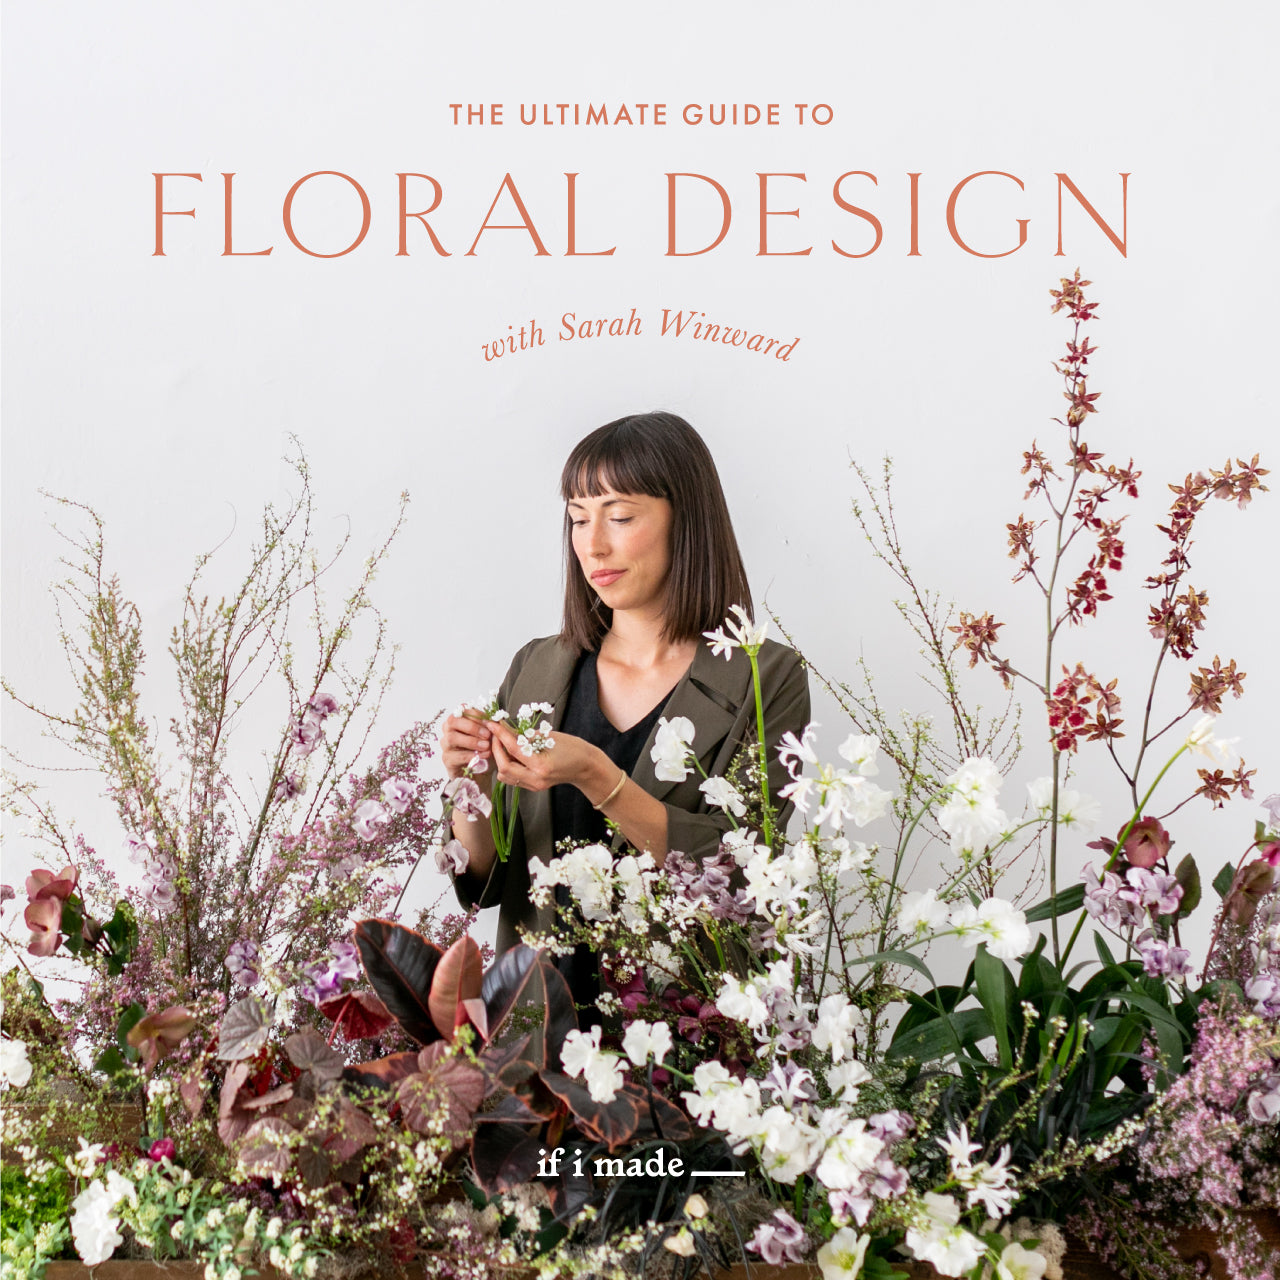 The Ultimate Guide to Floral Design with Sarah Winward (ESPP0521) - 26 payments of $69